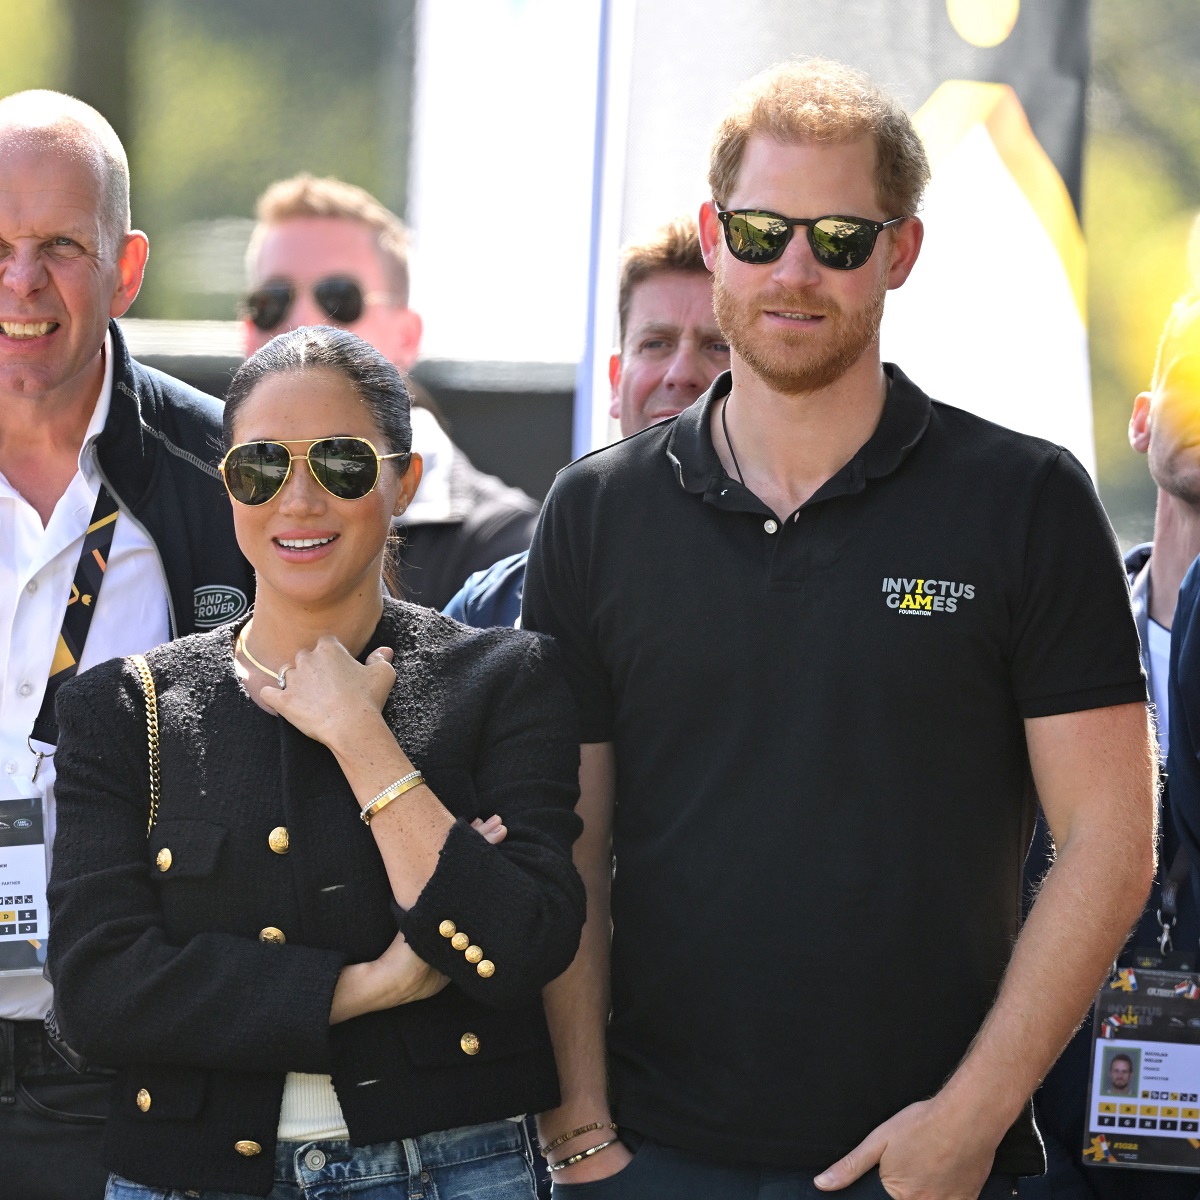 Prince Harry and Meghan Markle Could Bore Netflix Viewers With Their Old Rehashed Content, Expert Says